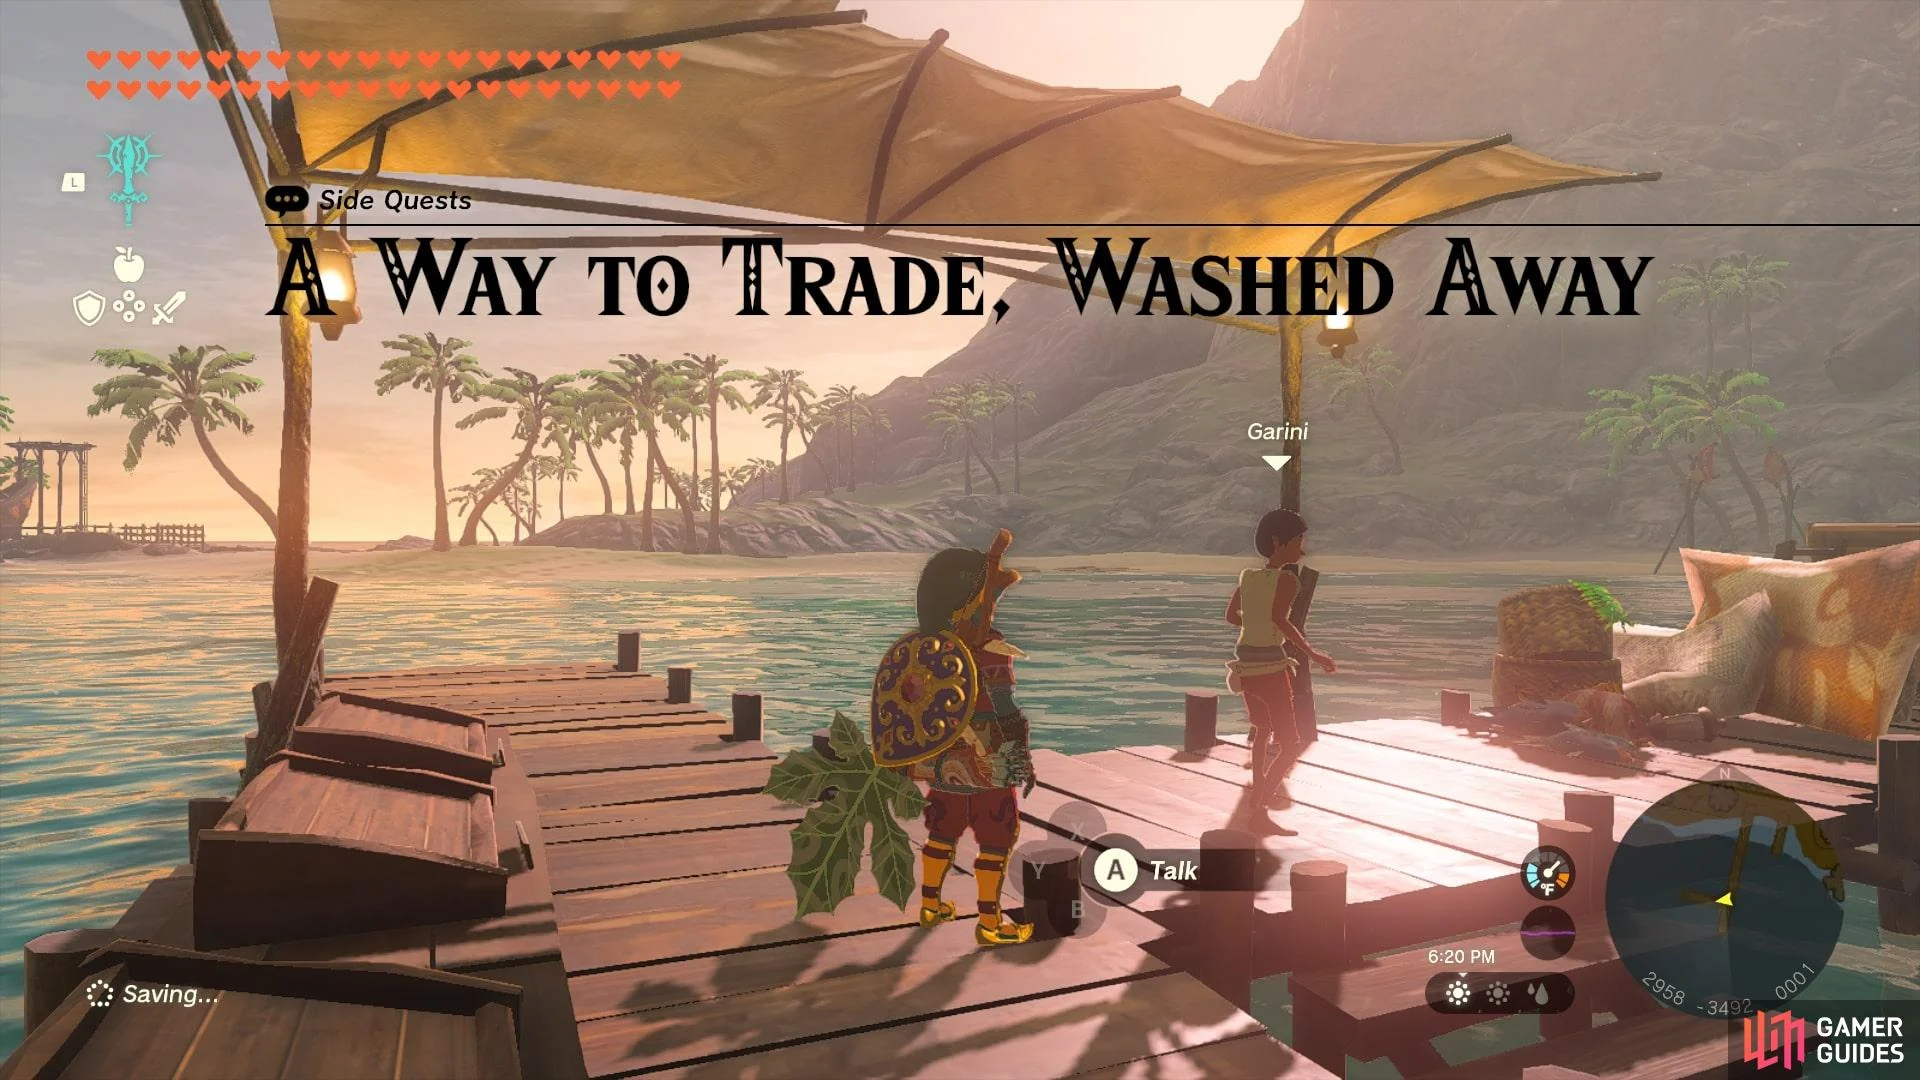 A Way to Trade Washed Away